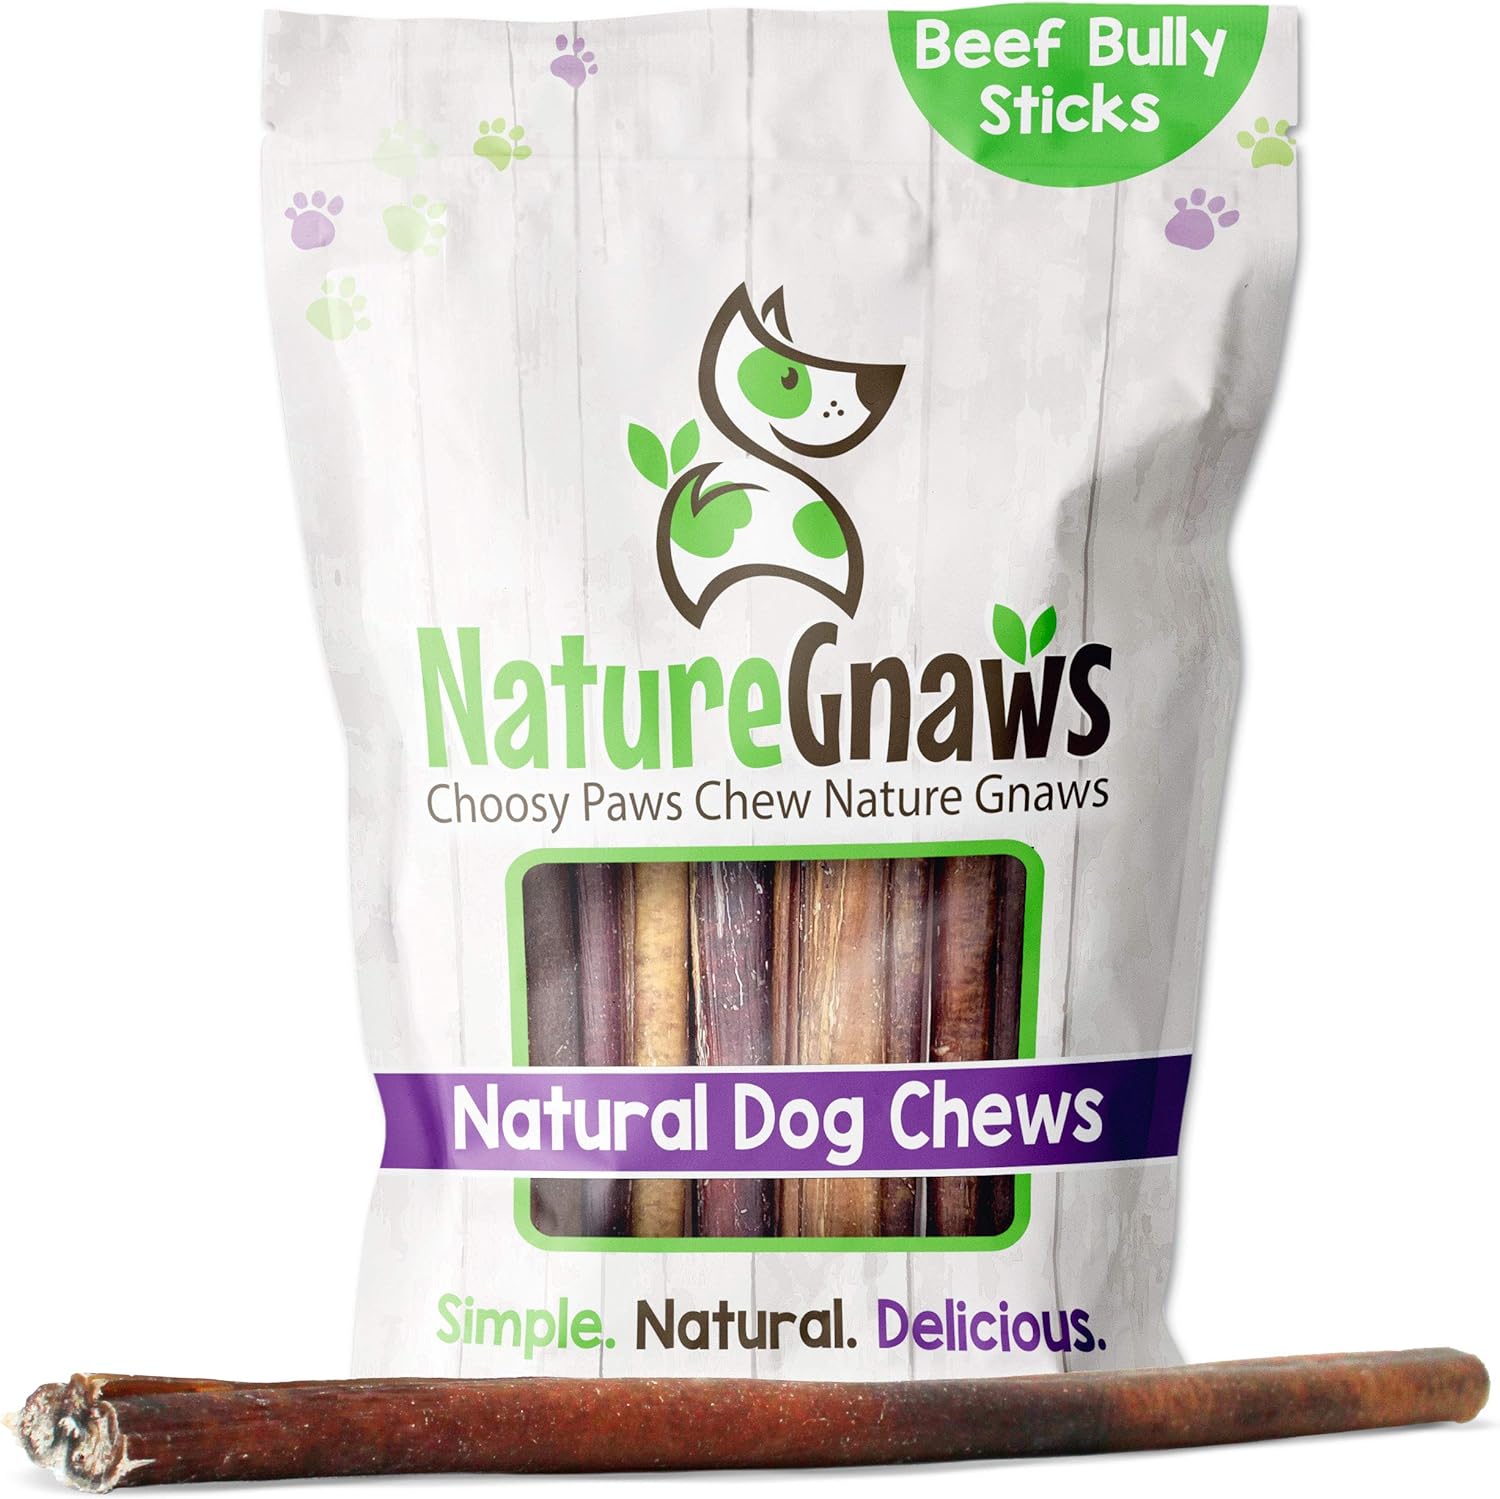 Nature Gnaws Bully Sticks for Dogs - Premium Natural Beef Dental Bones - Long Lasting Dog Chew Treats for Aggressive Chewers - Rawhide Free - Mixed Thickness 11-12"